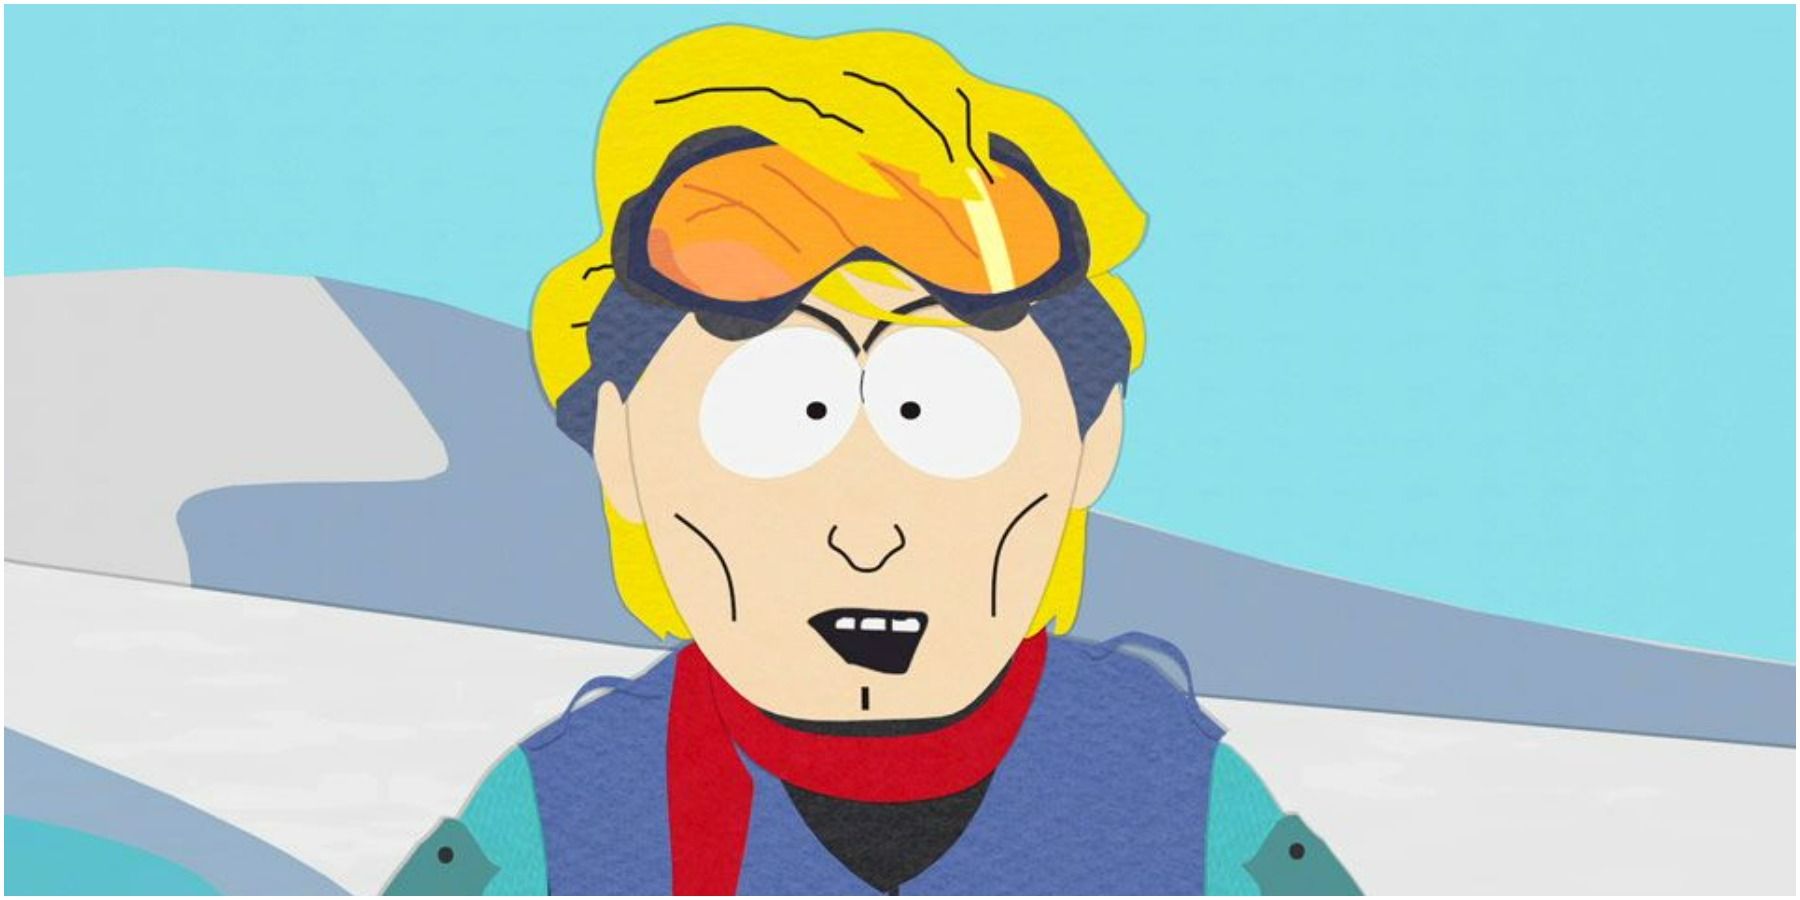 10 South Park Characters Who Became More Likable Over Time